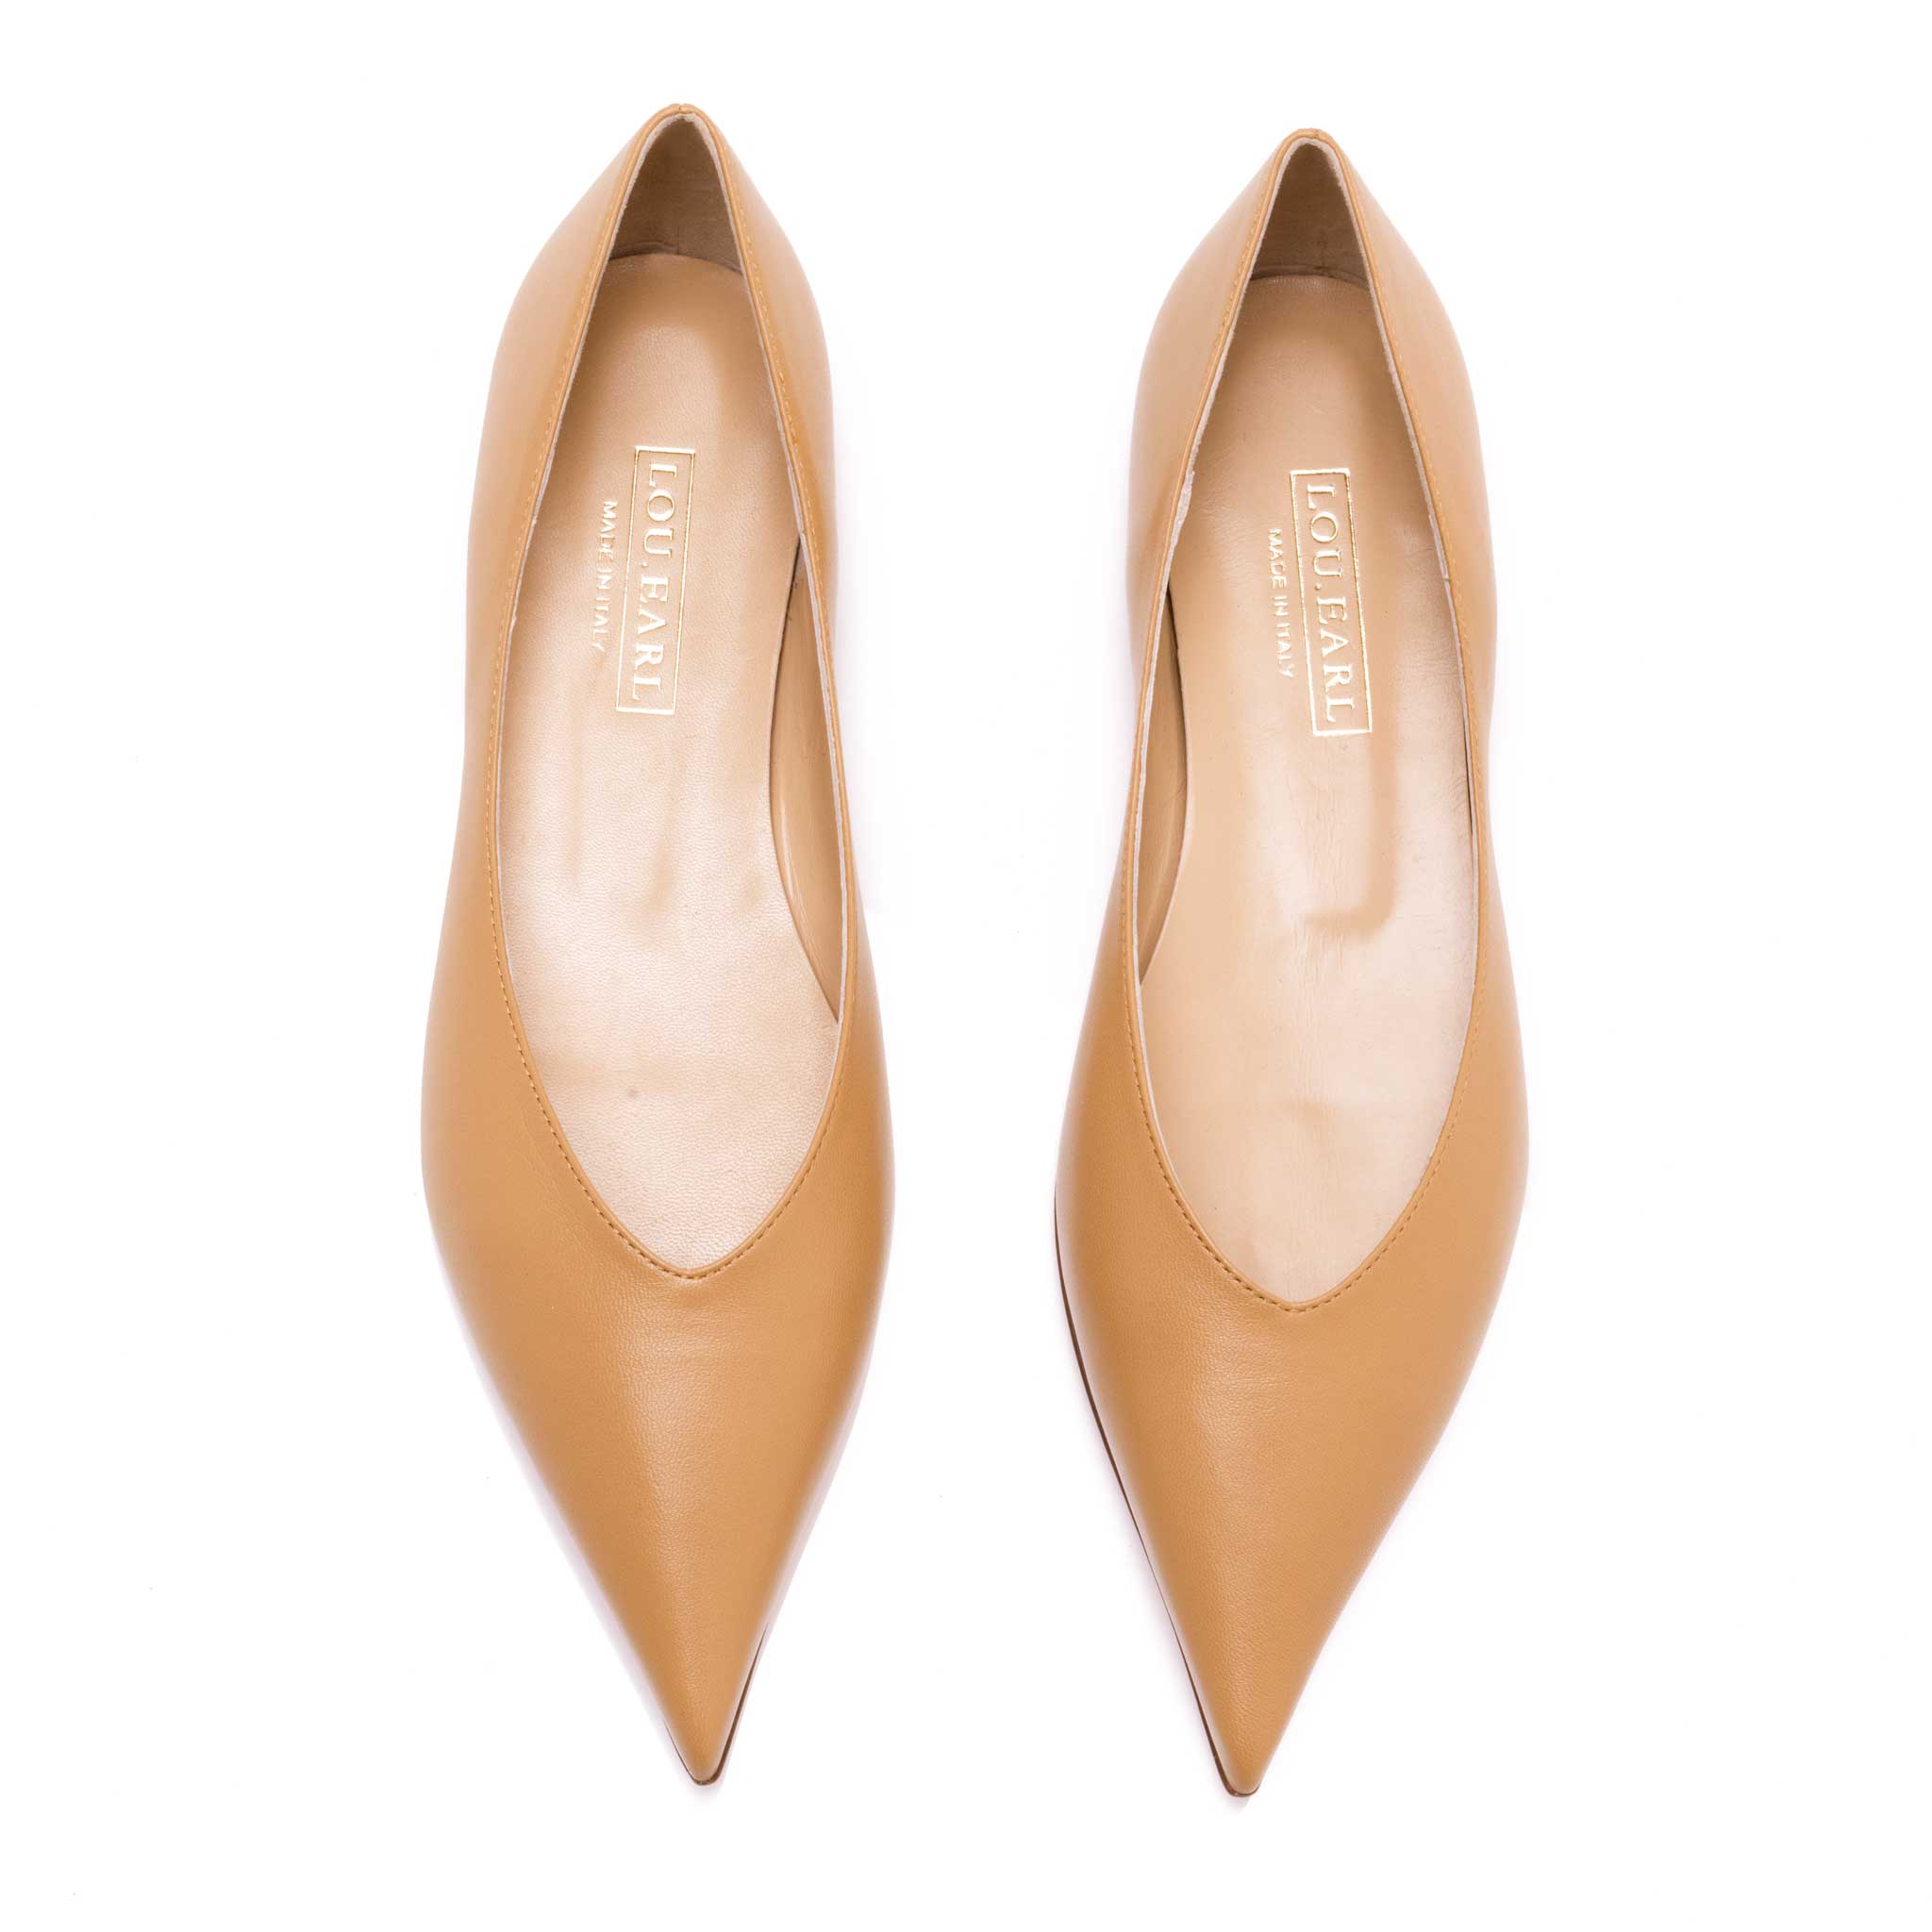 ultra pointed toe shoes in camel tan color leather for women